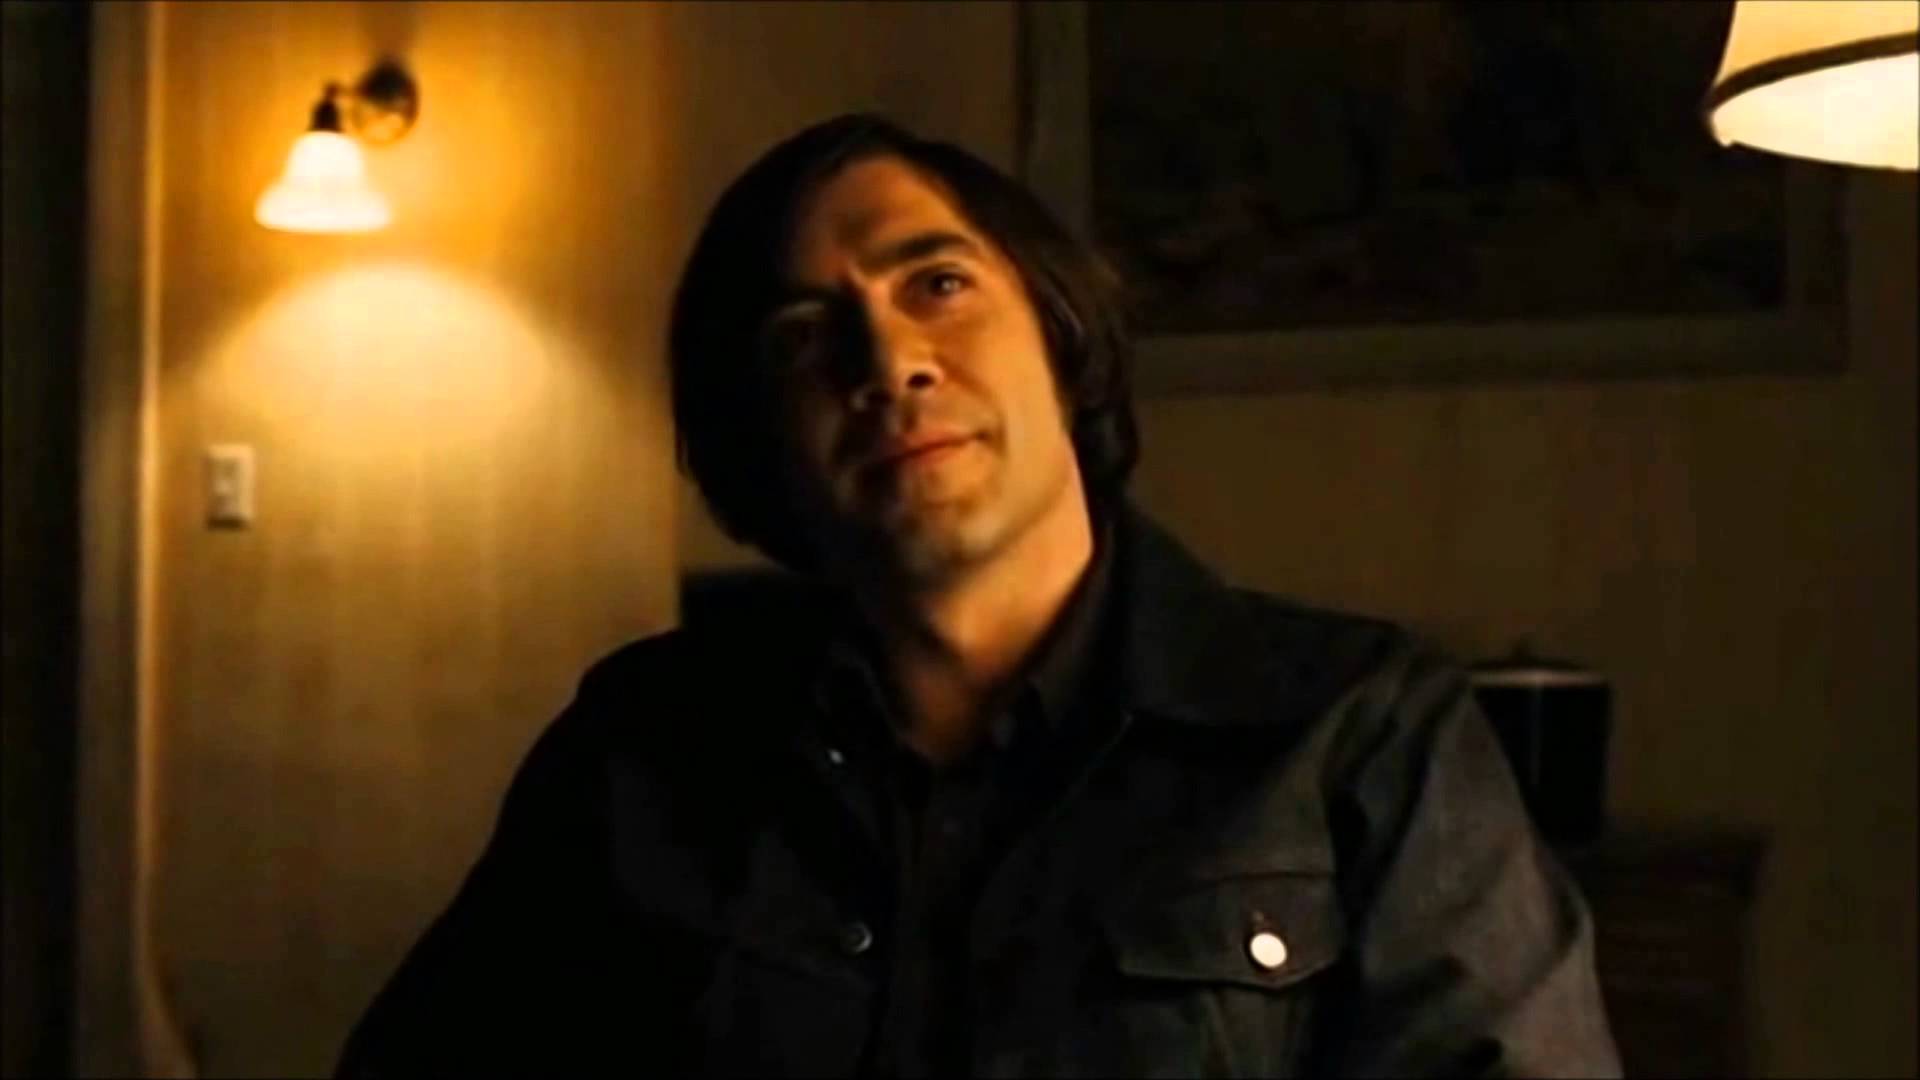 No Country For Old Men wallpaper, Movie, HQ No Country For Old Men pictureK Wallpaper 2019